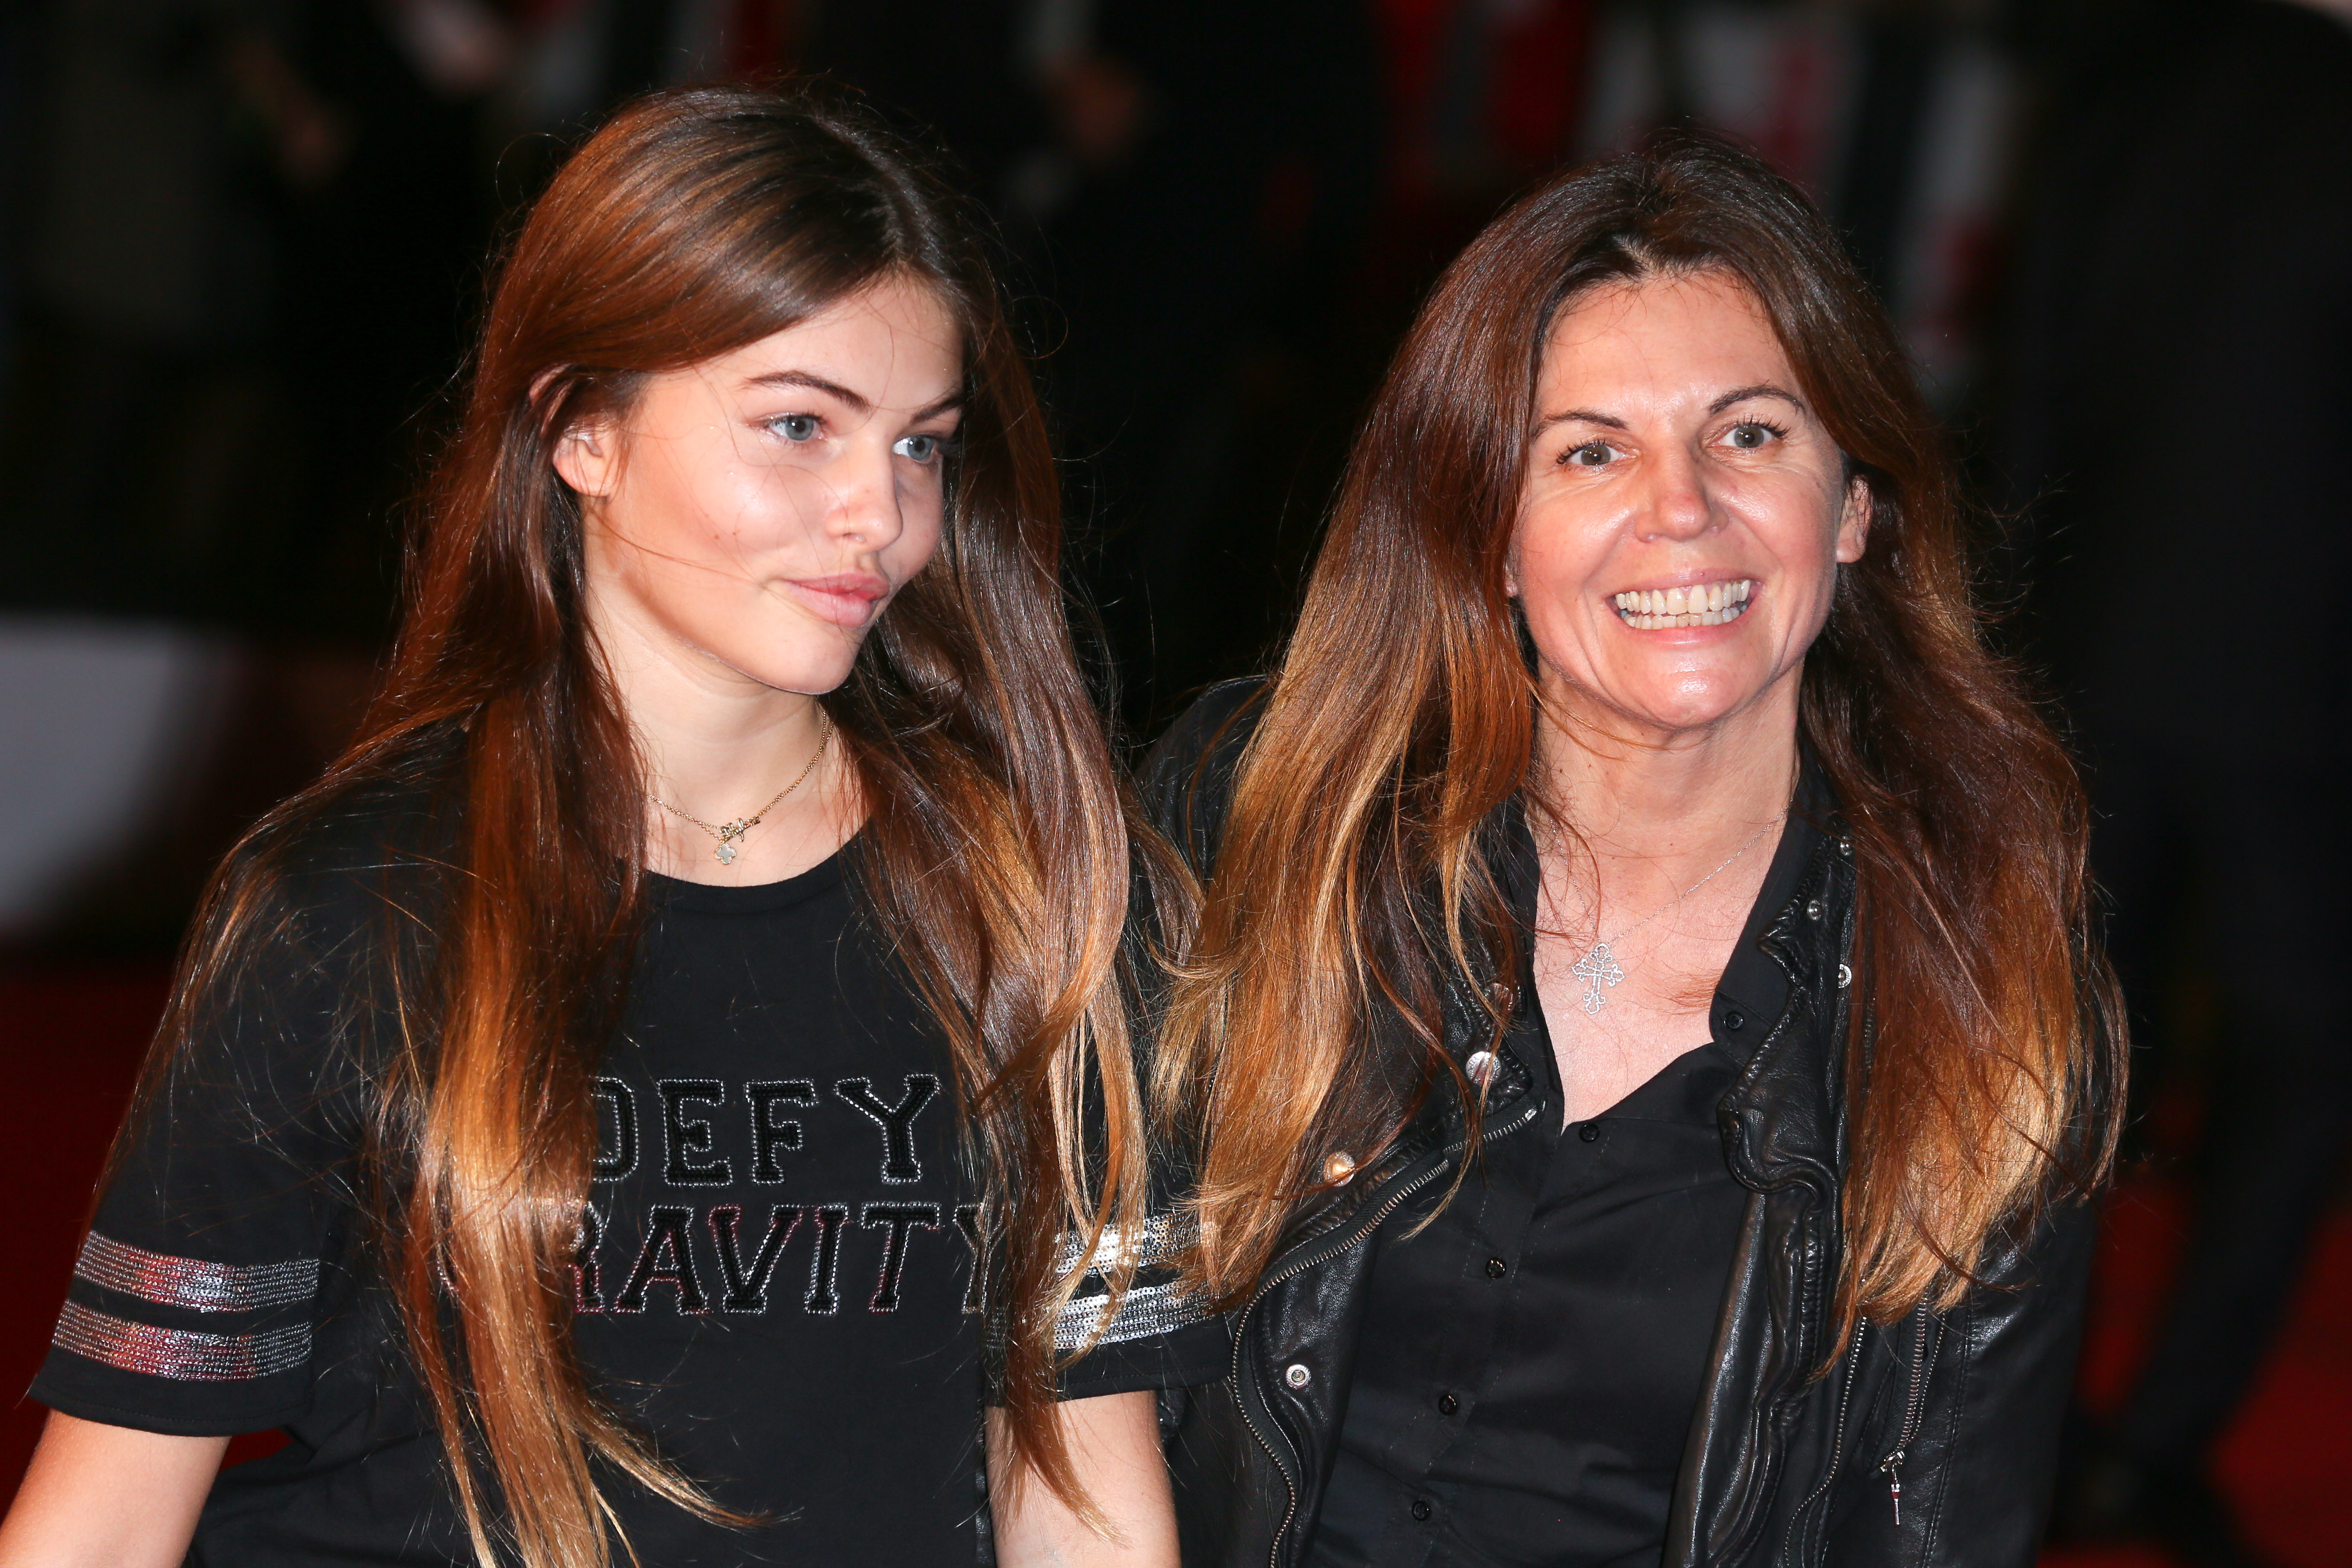 Thylane Blondeau and Veronika Loubry attend the 17th NRJ Music Awards in Cannes, France on November 7, 2015 | Source: Getty Images